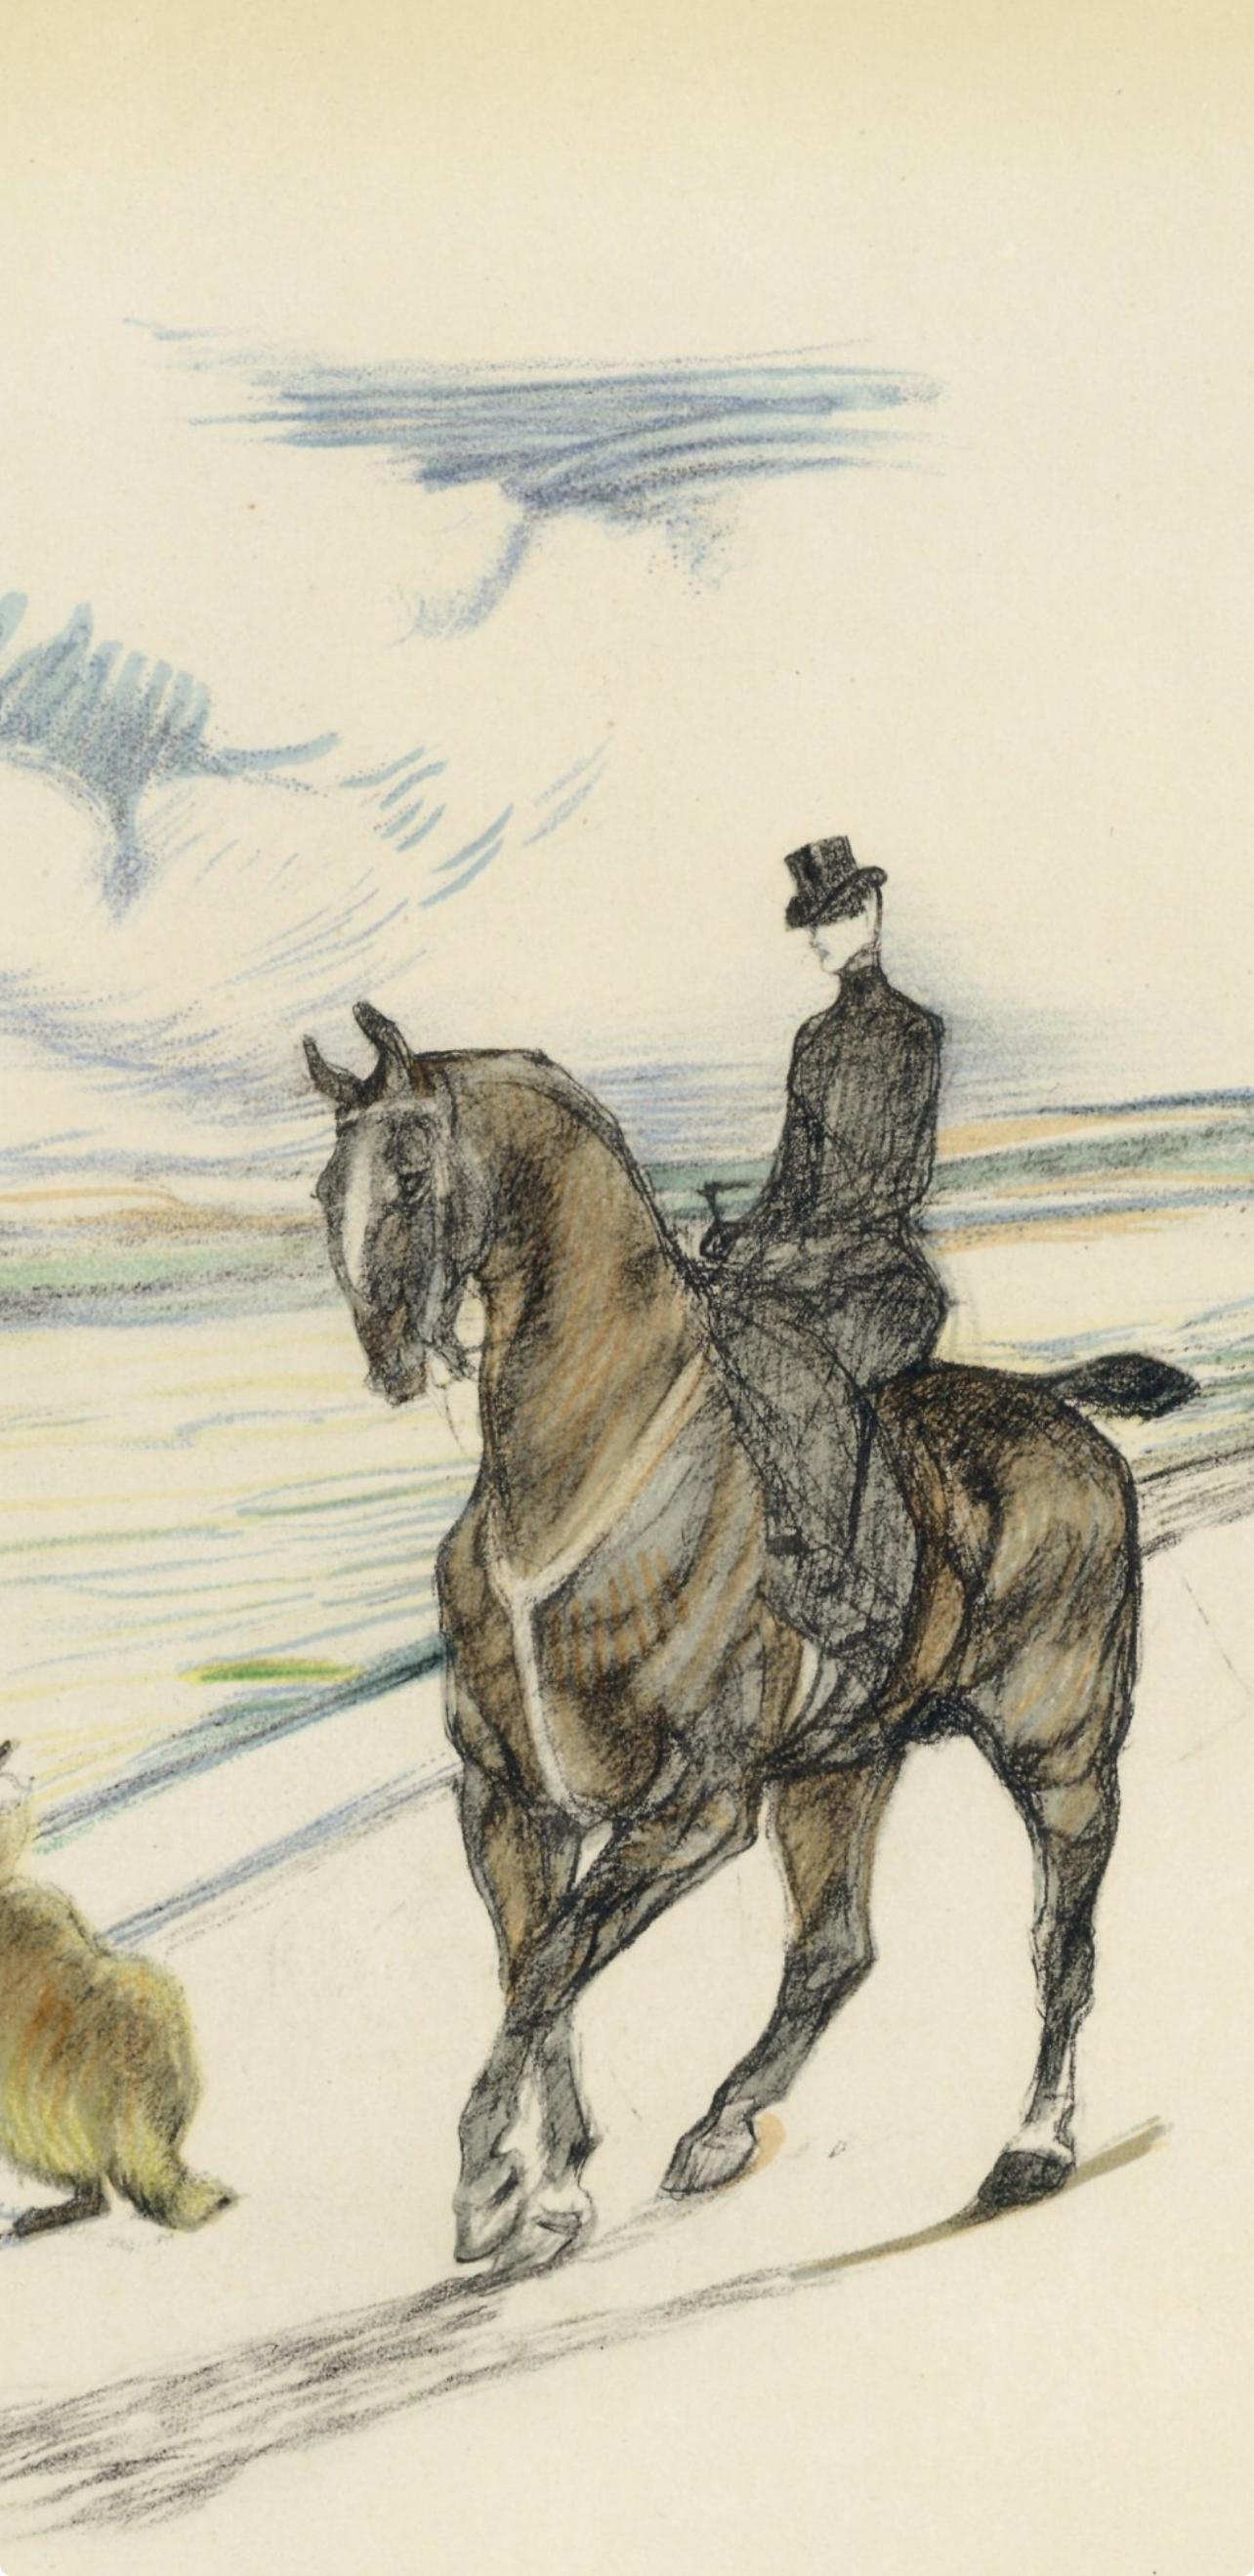 Toulouse-Lautrec, Amazone, The Circus by Toulouse-Lautrec (after) - Print by Henri de Toulouse-Lautrec